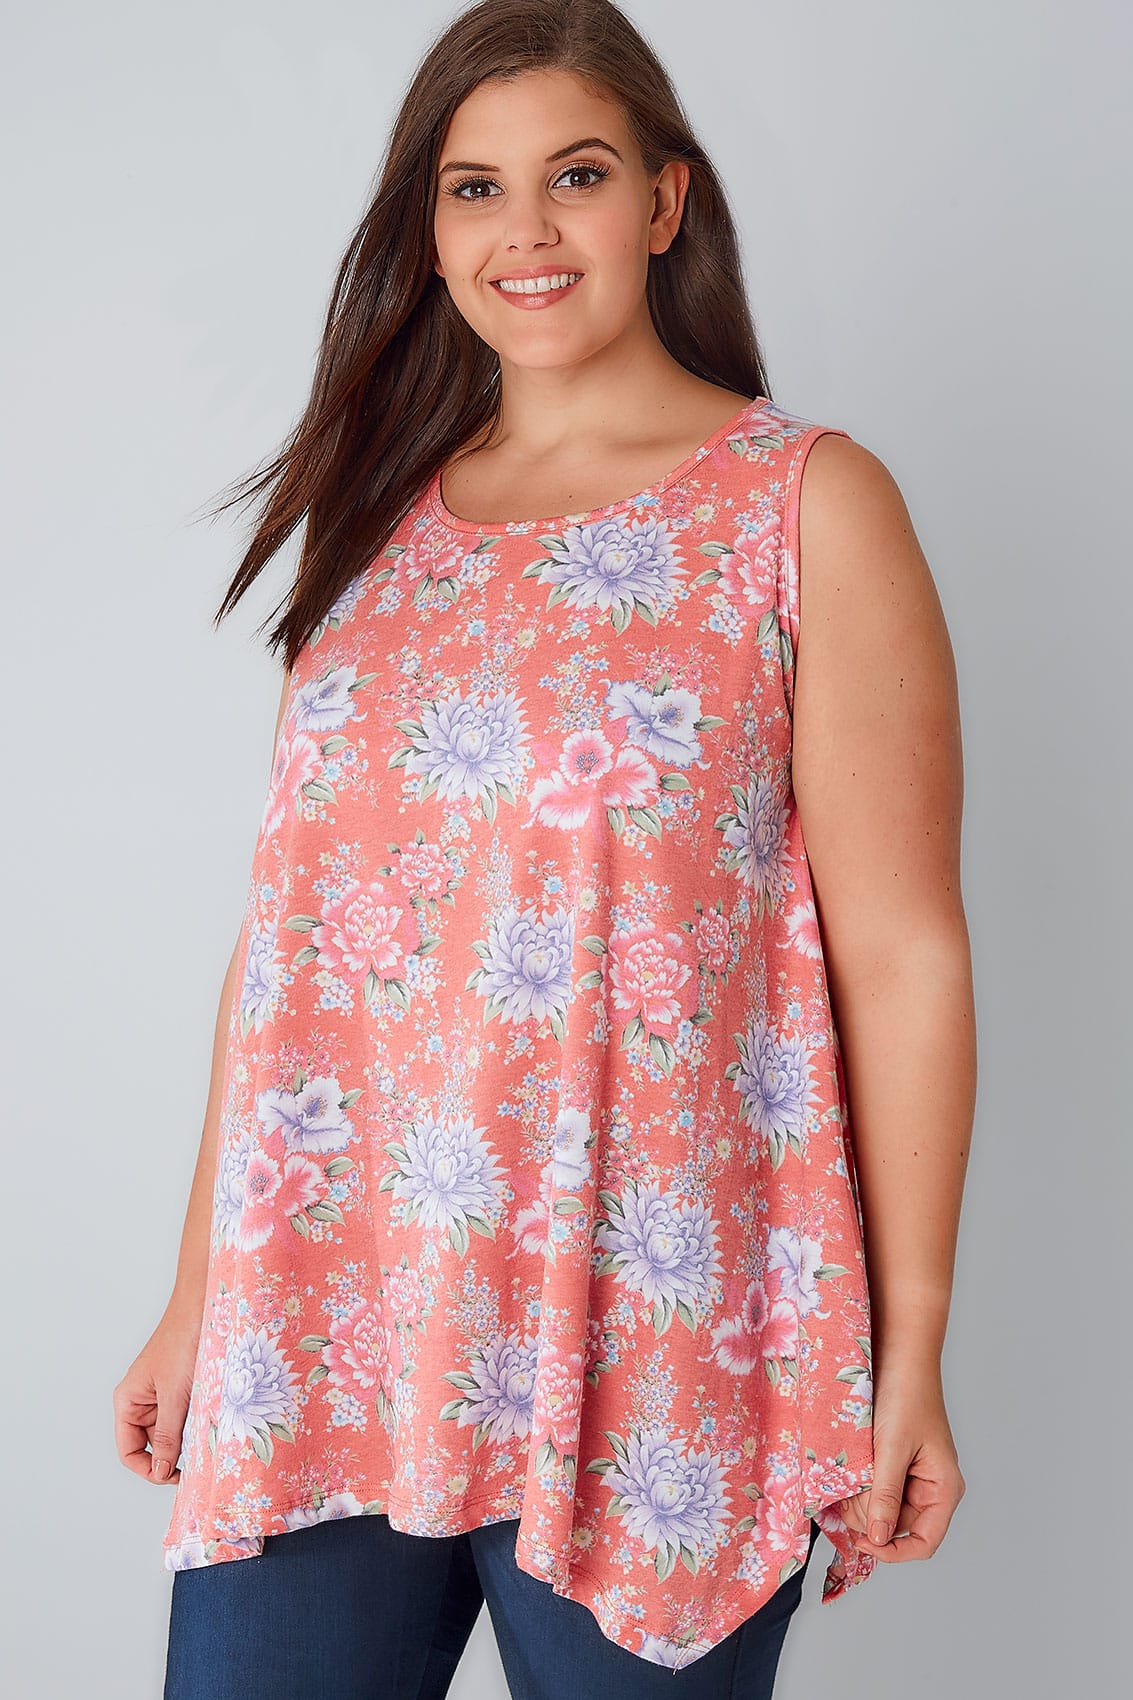 Peachy Pink And Multi Floral Print Sleeveless Top With Hanky Hem Plus 8585